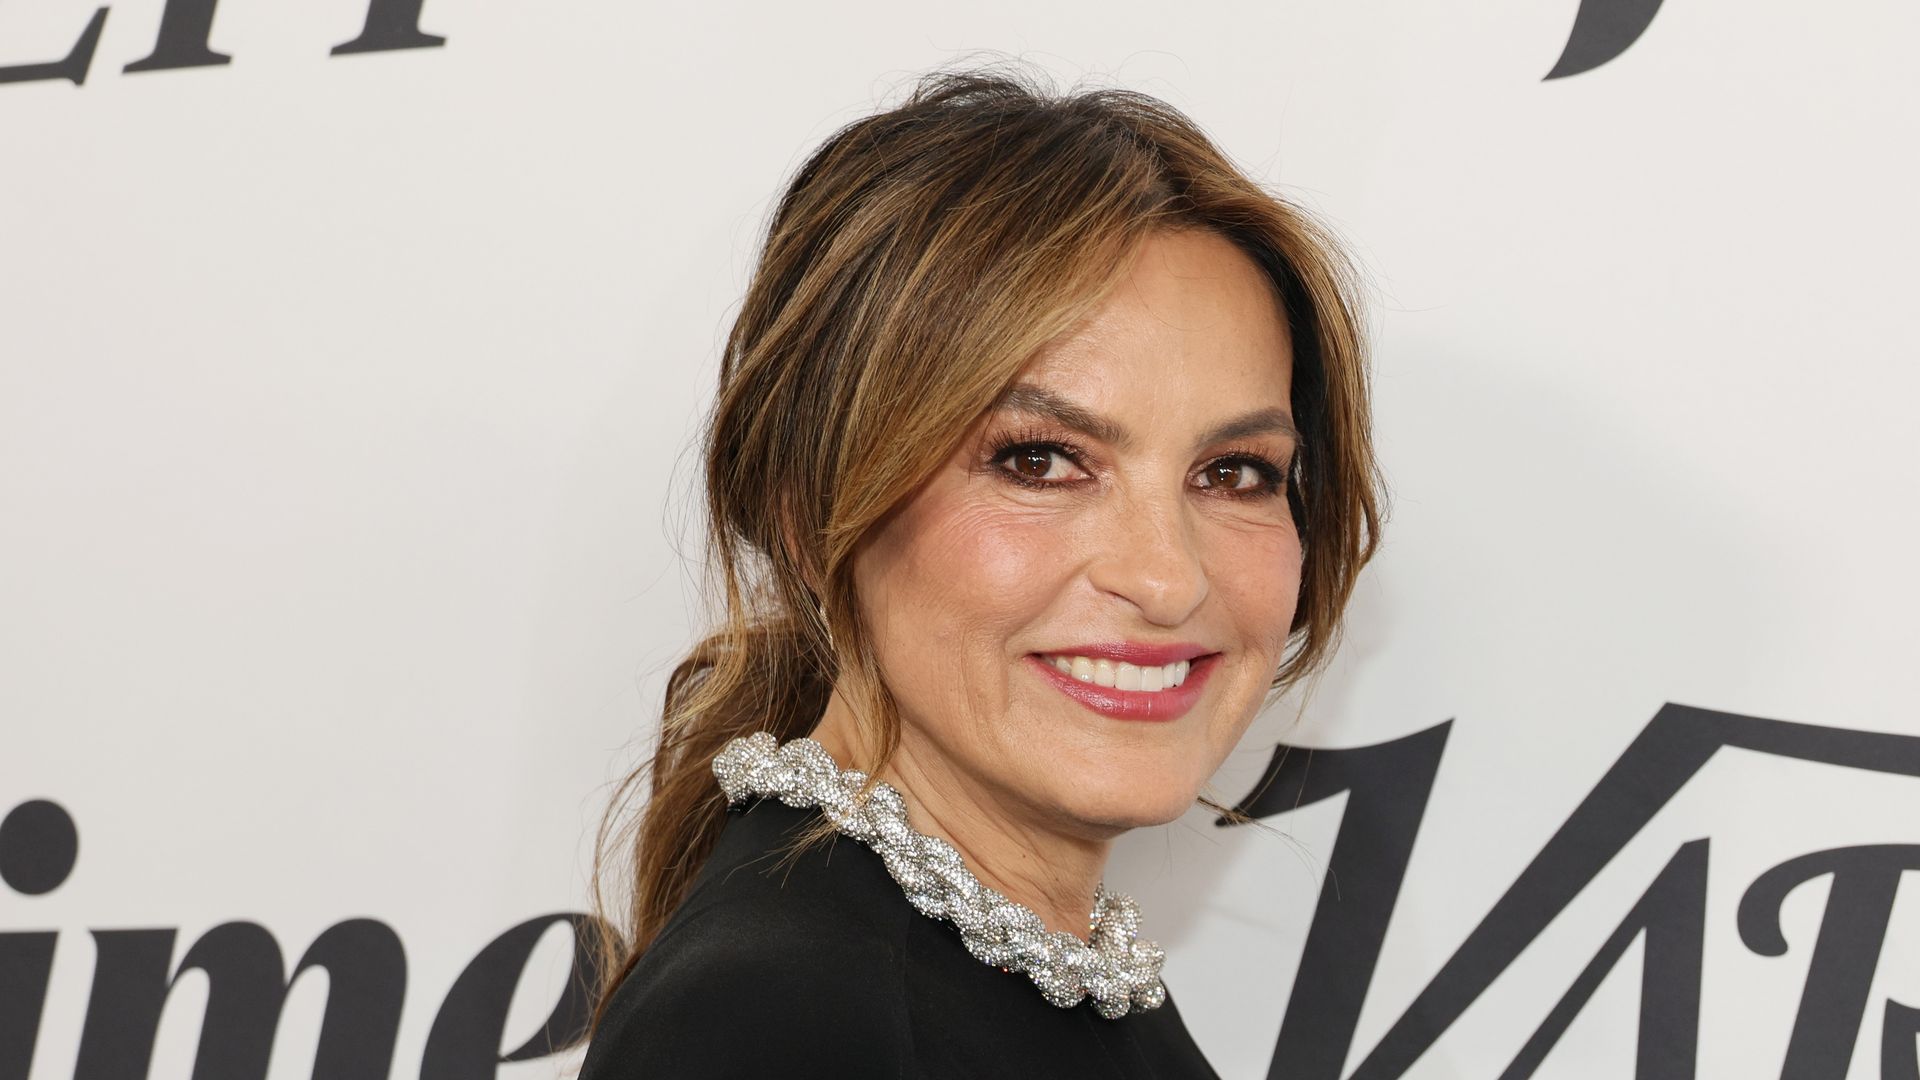 Meet Mariska Hargitay's 5 famous siblings and how they've followed in their famous parents' footsteps